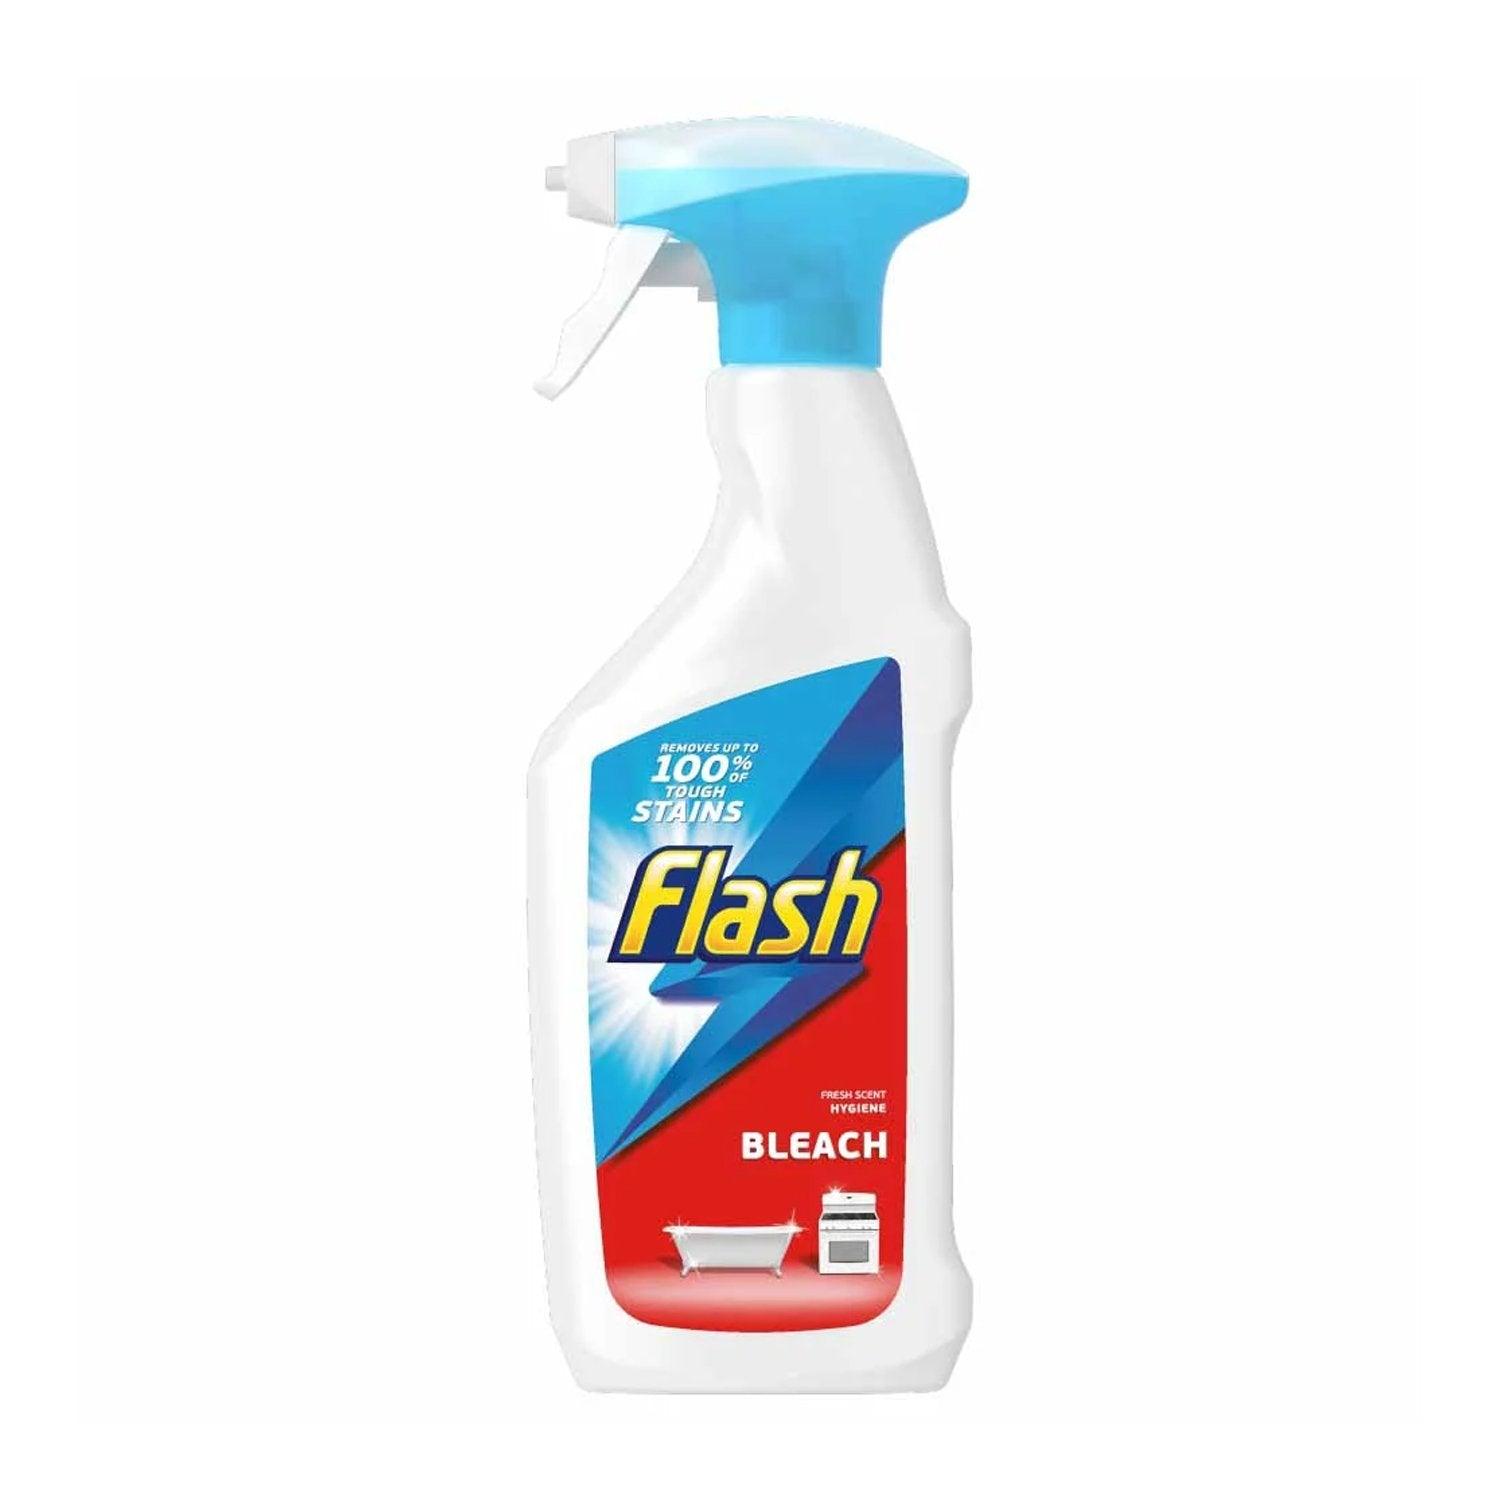 Flash with Bleach 3 in 1 Spray - 450ml Bottle - Vending Superstore